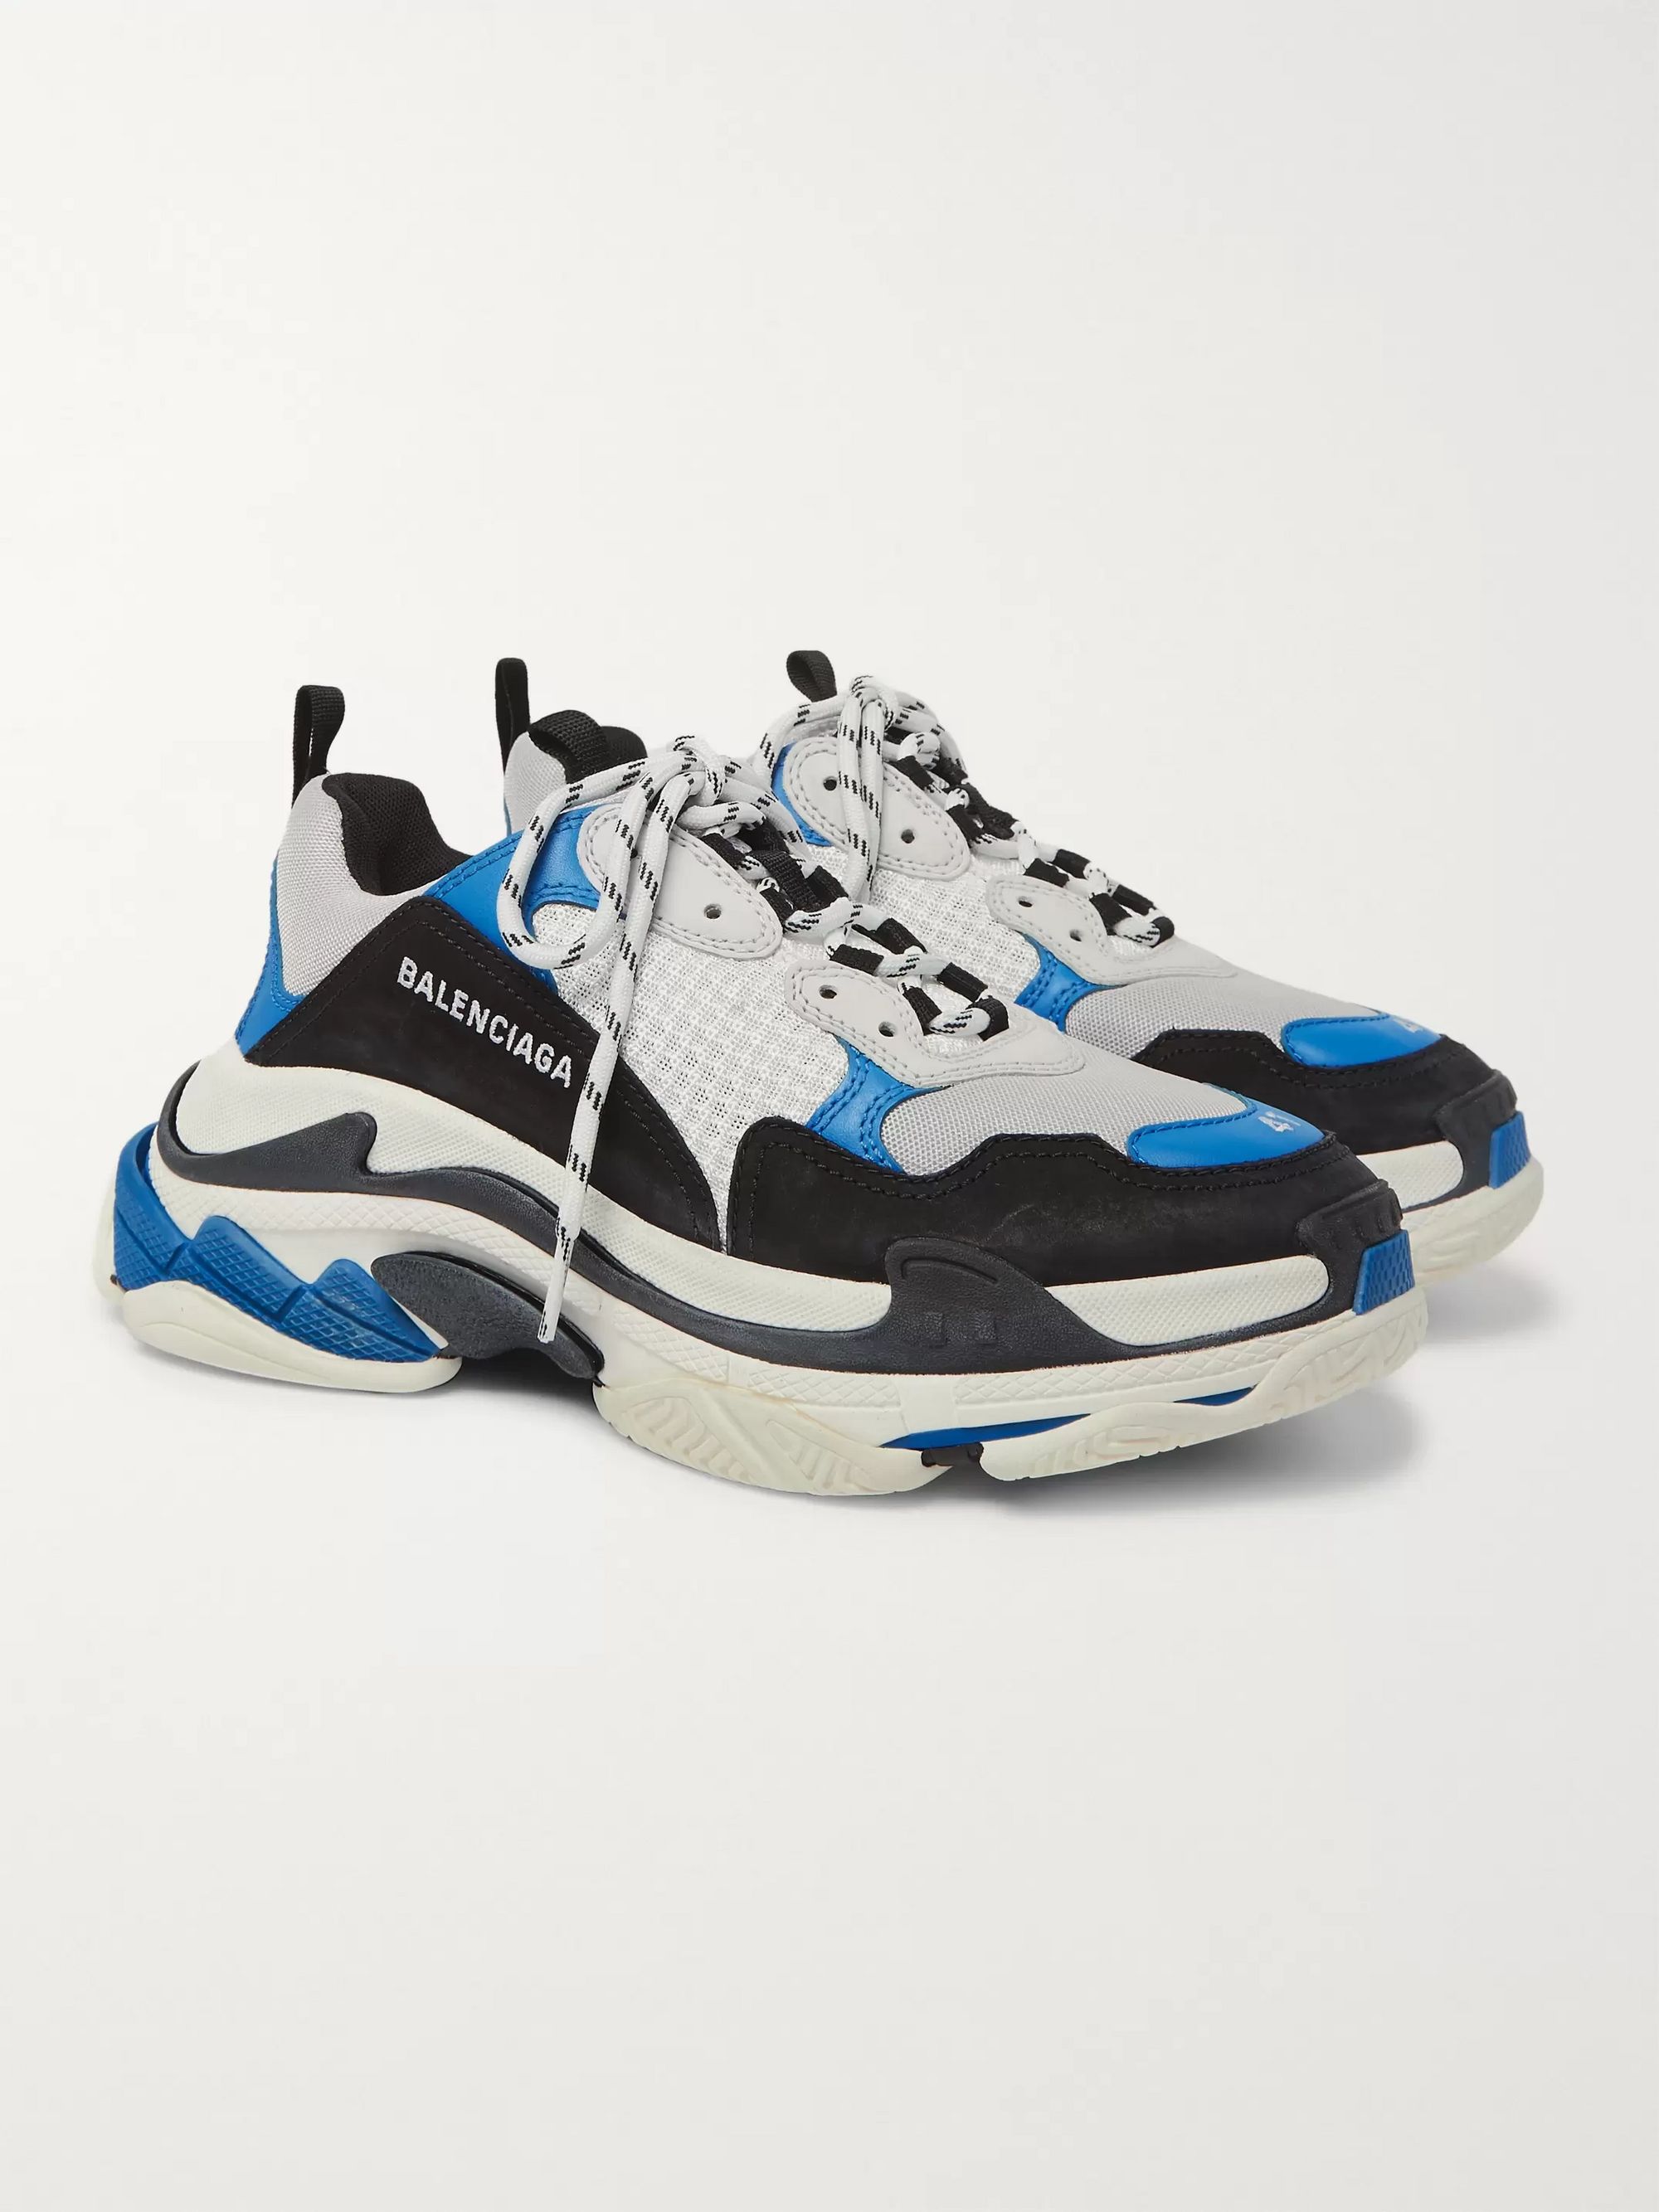 For sale new Balenciaga Triple S Trainers Gray 2 0 copy shoes